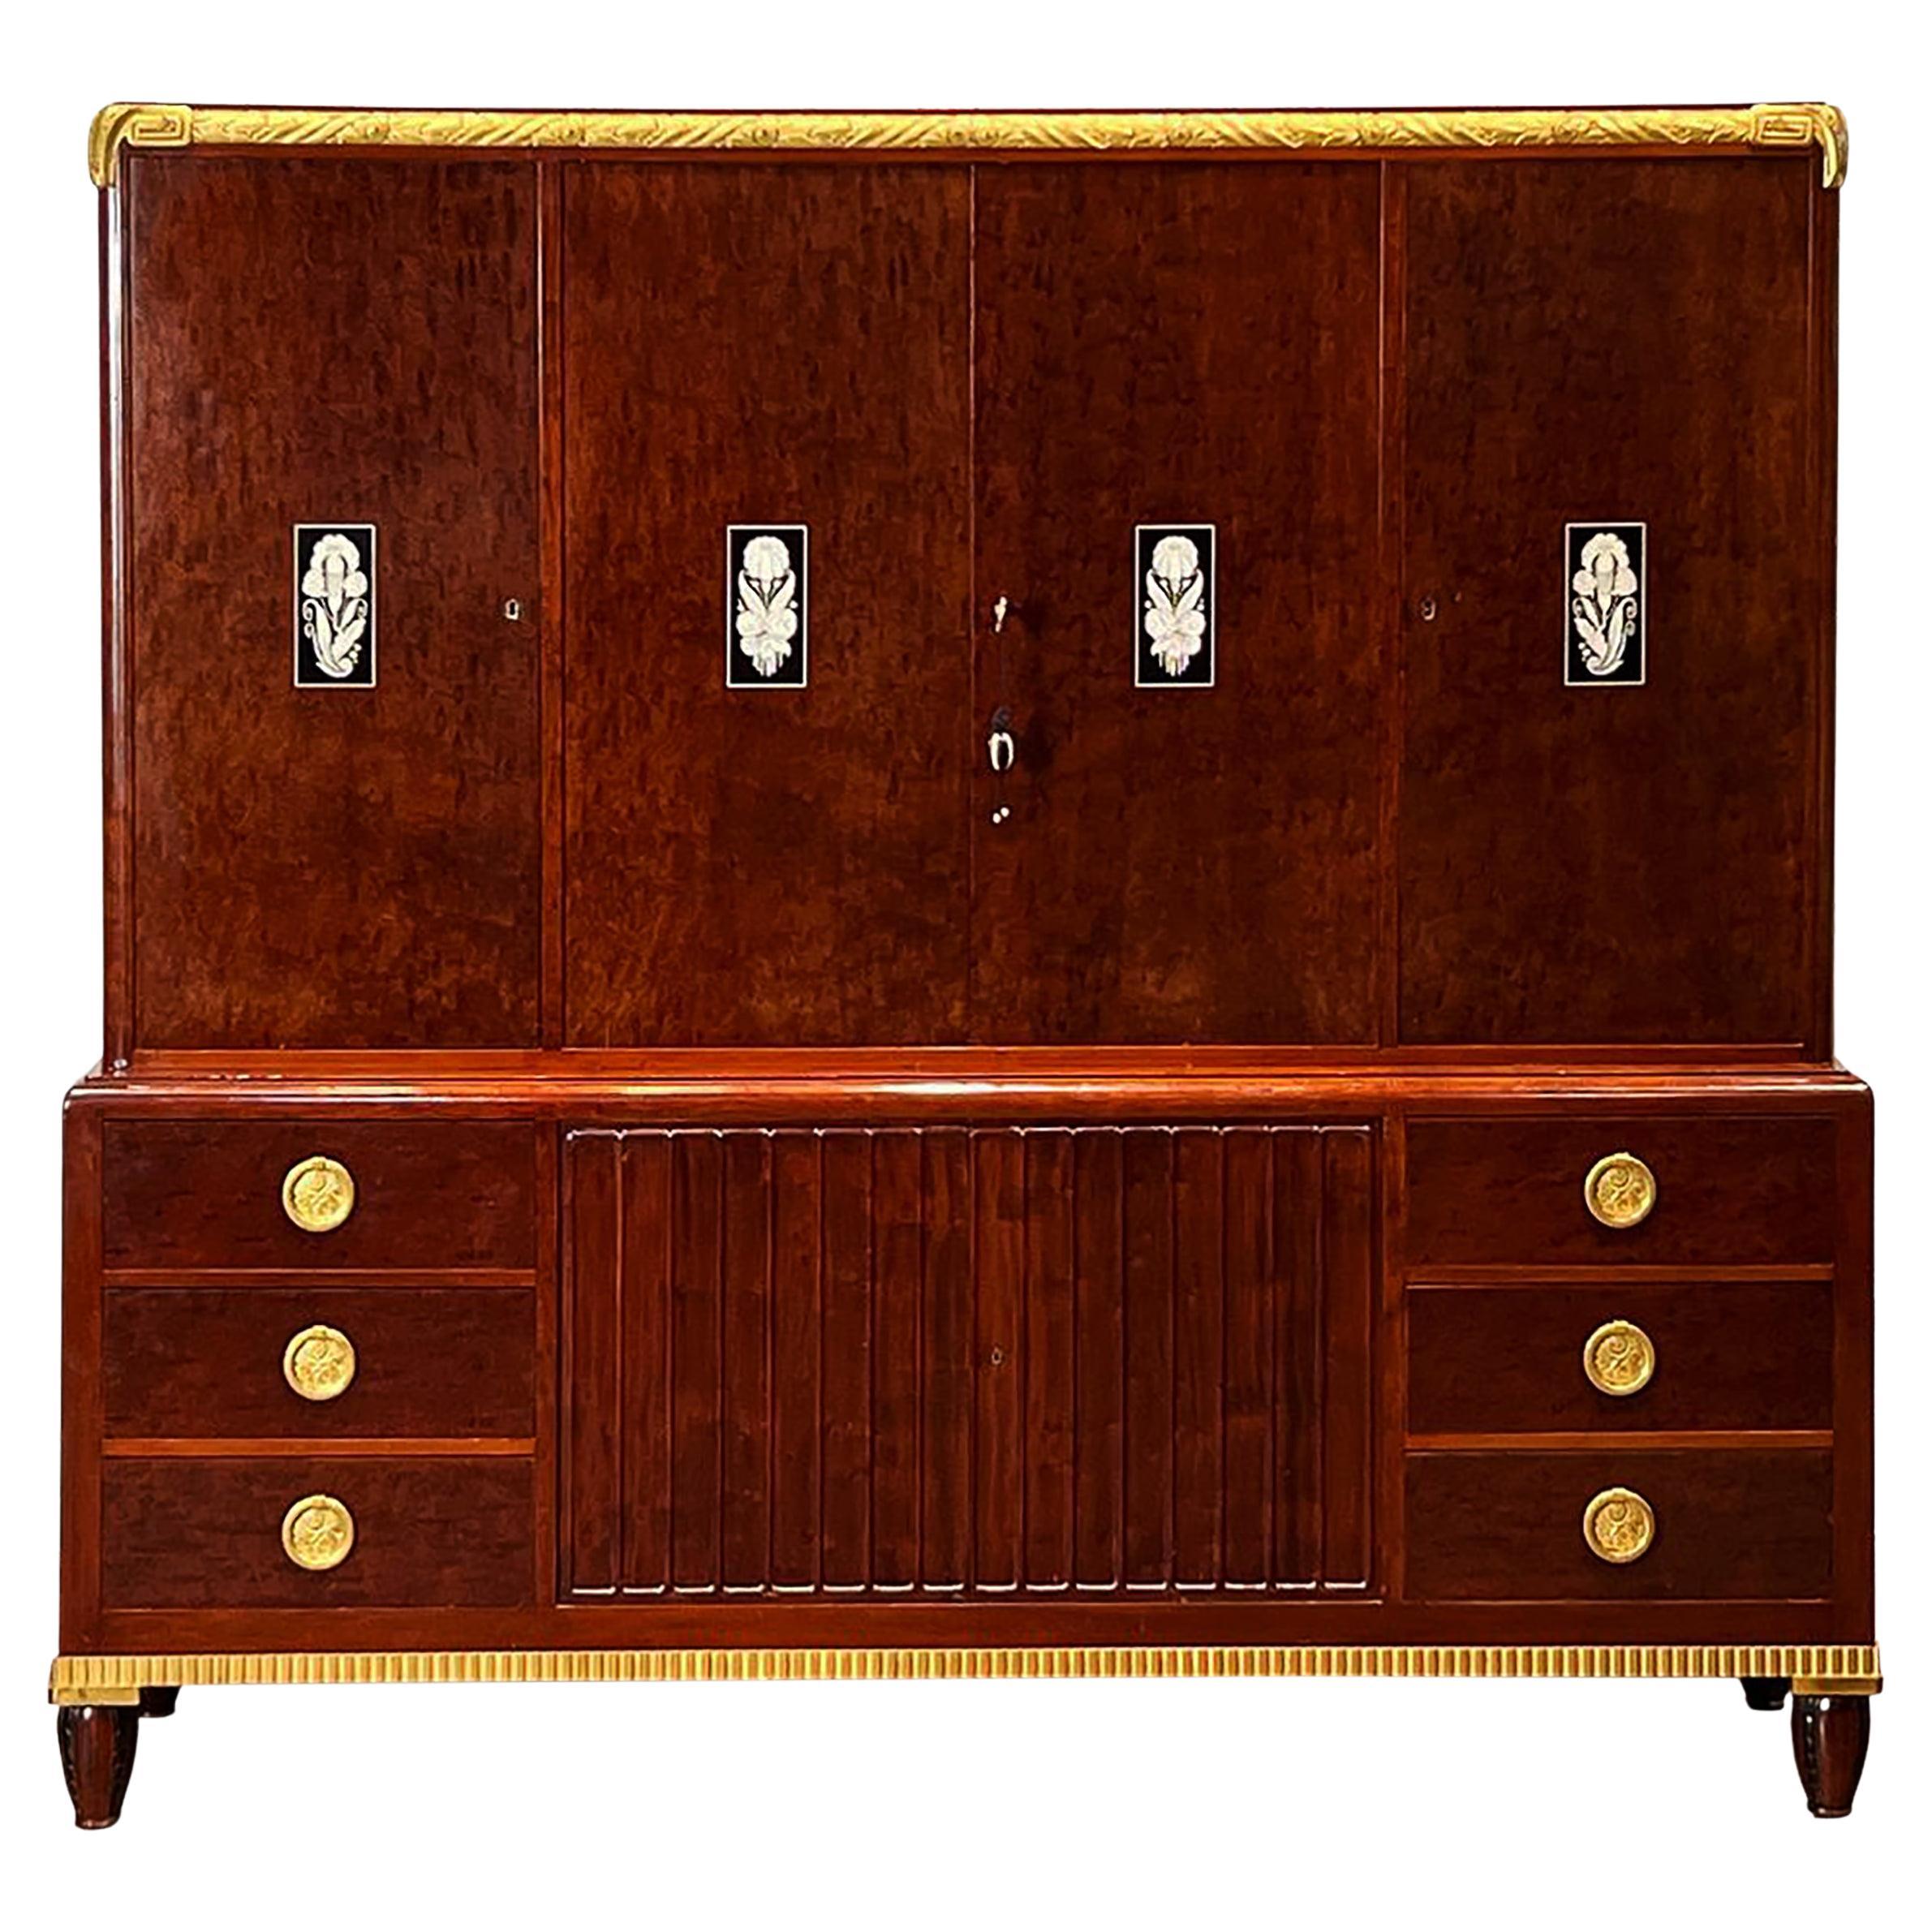 Period French Art Deco Cabinet in Plum Pudding Mahogany and Bronze Doré For Sale